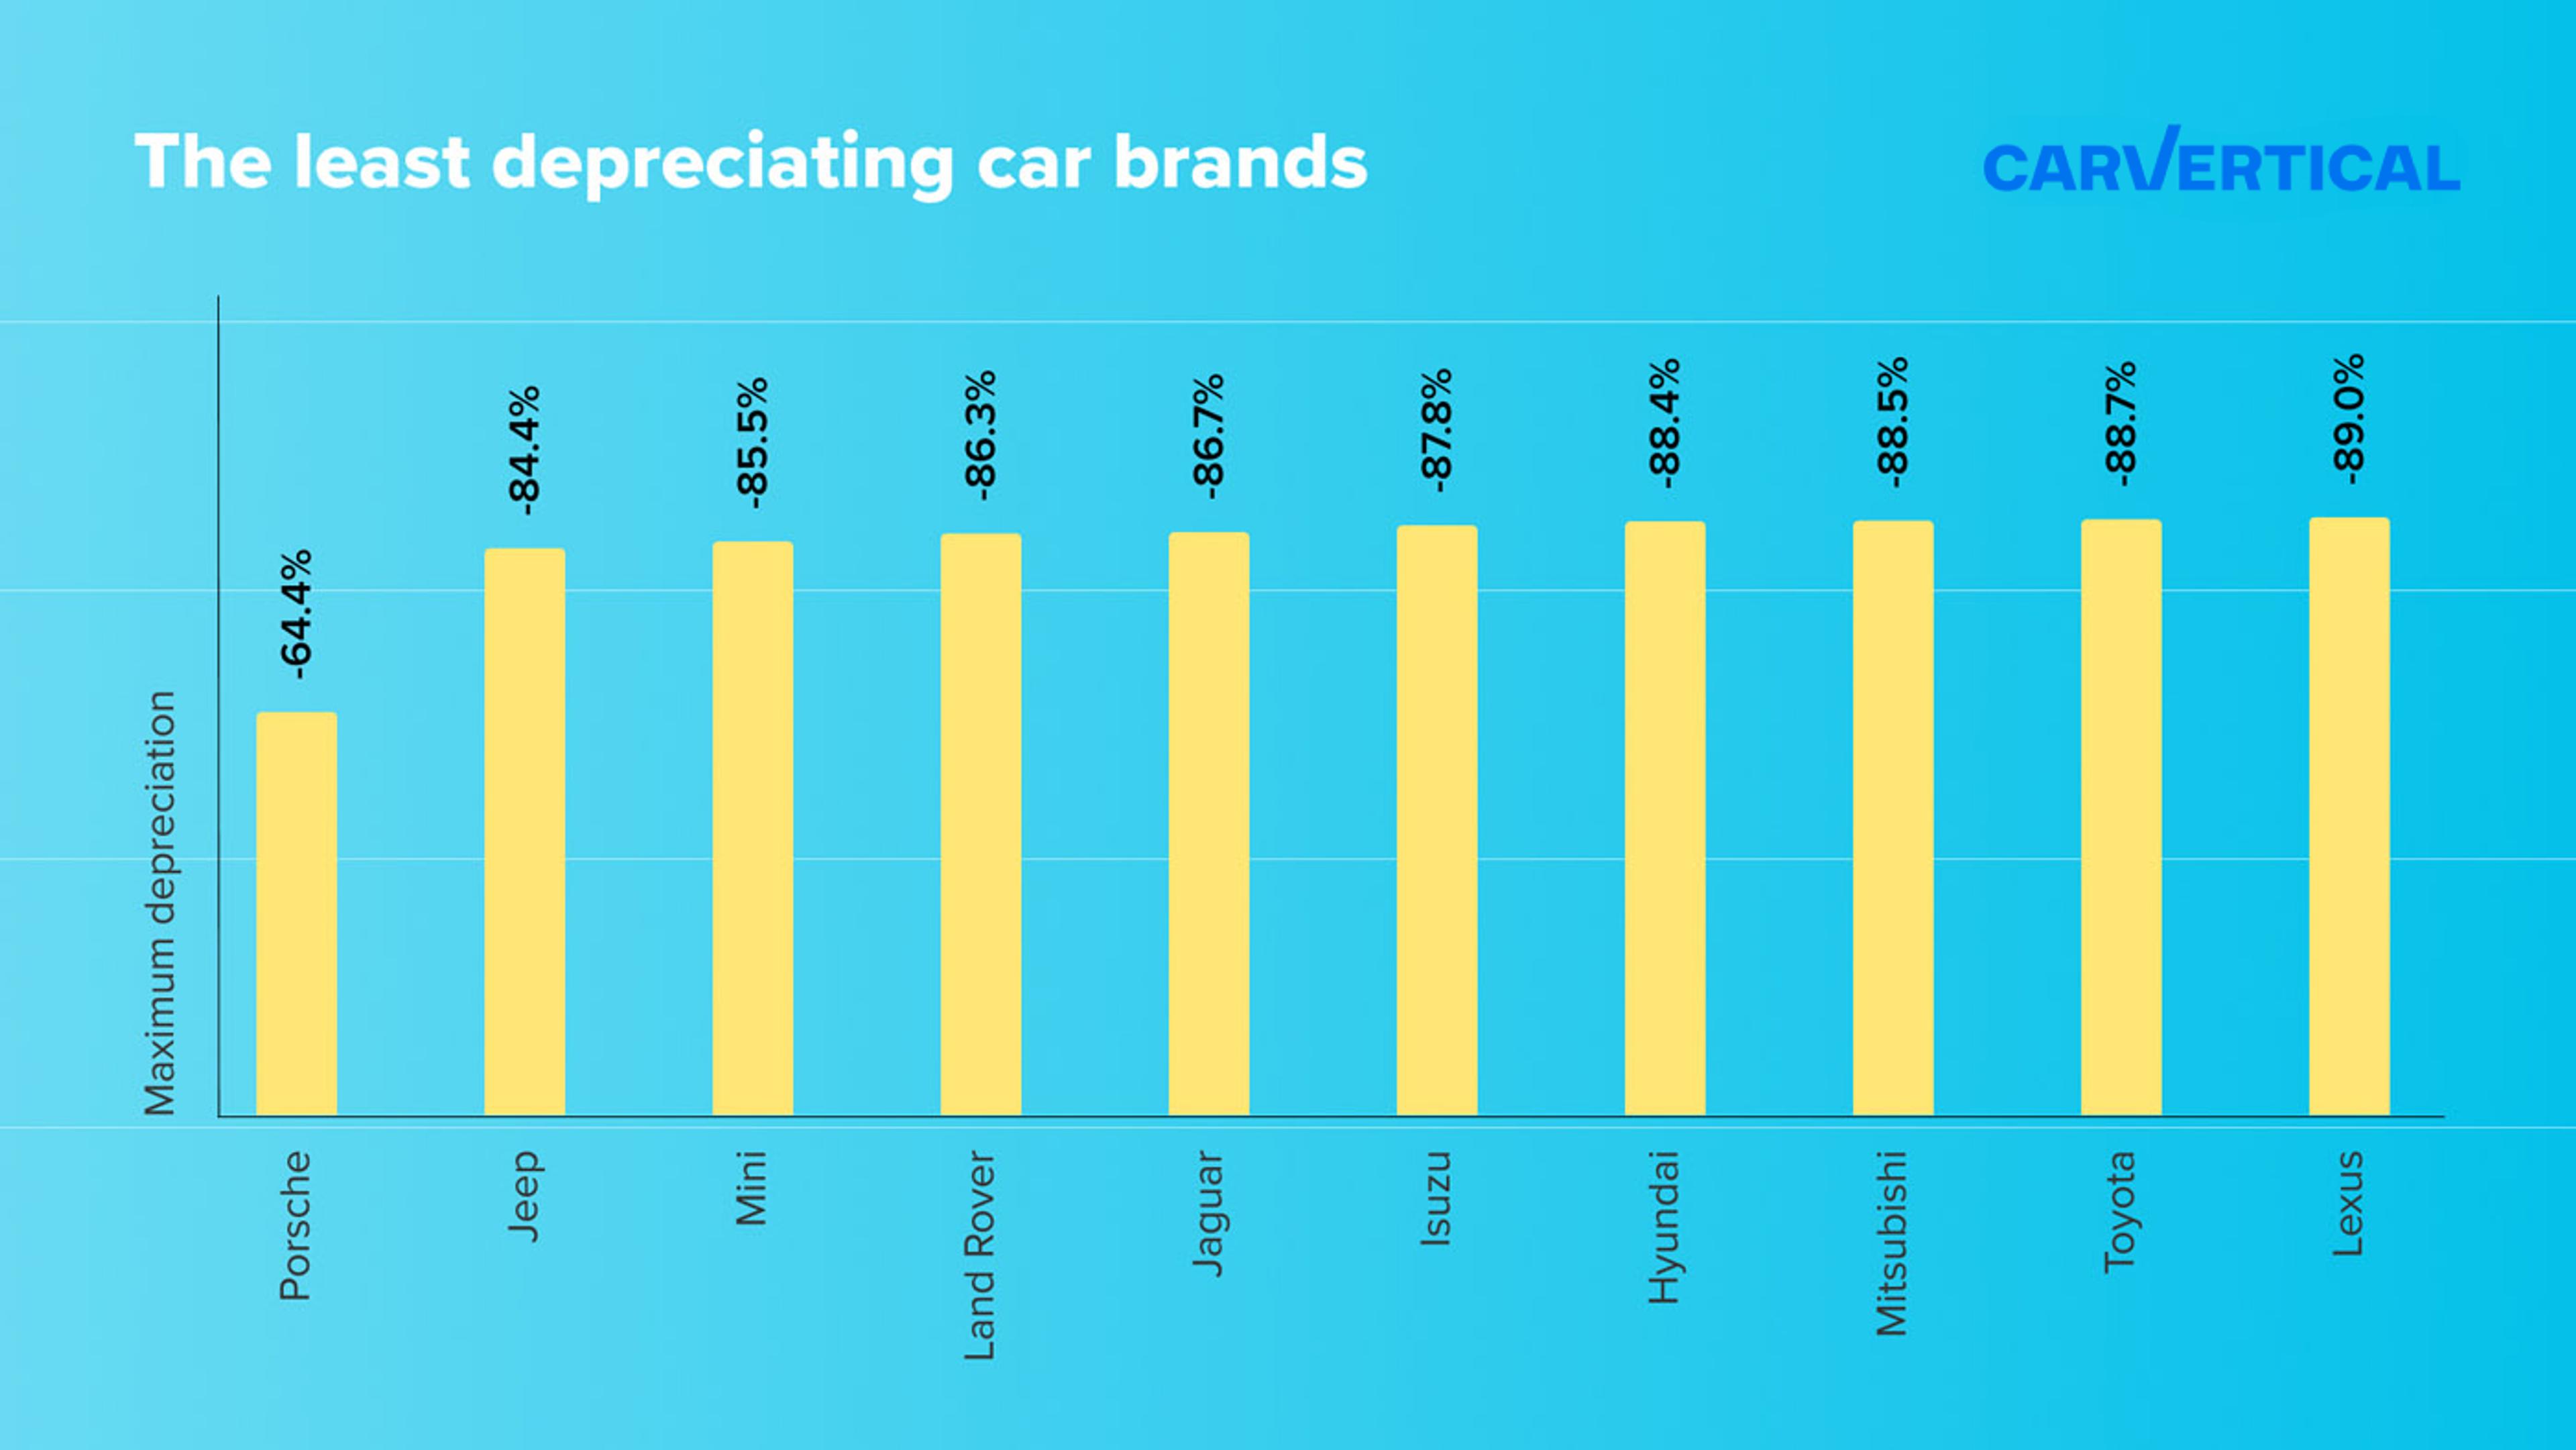 Graph showing what car brands are the least depreciating